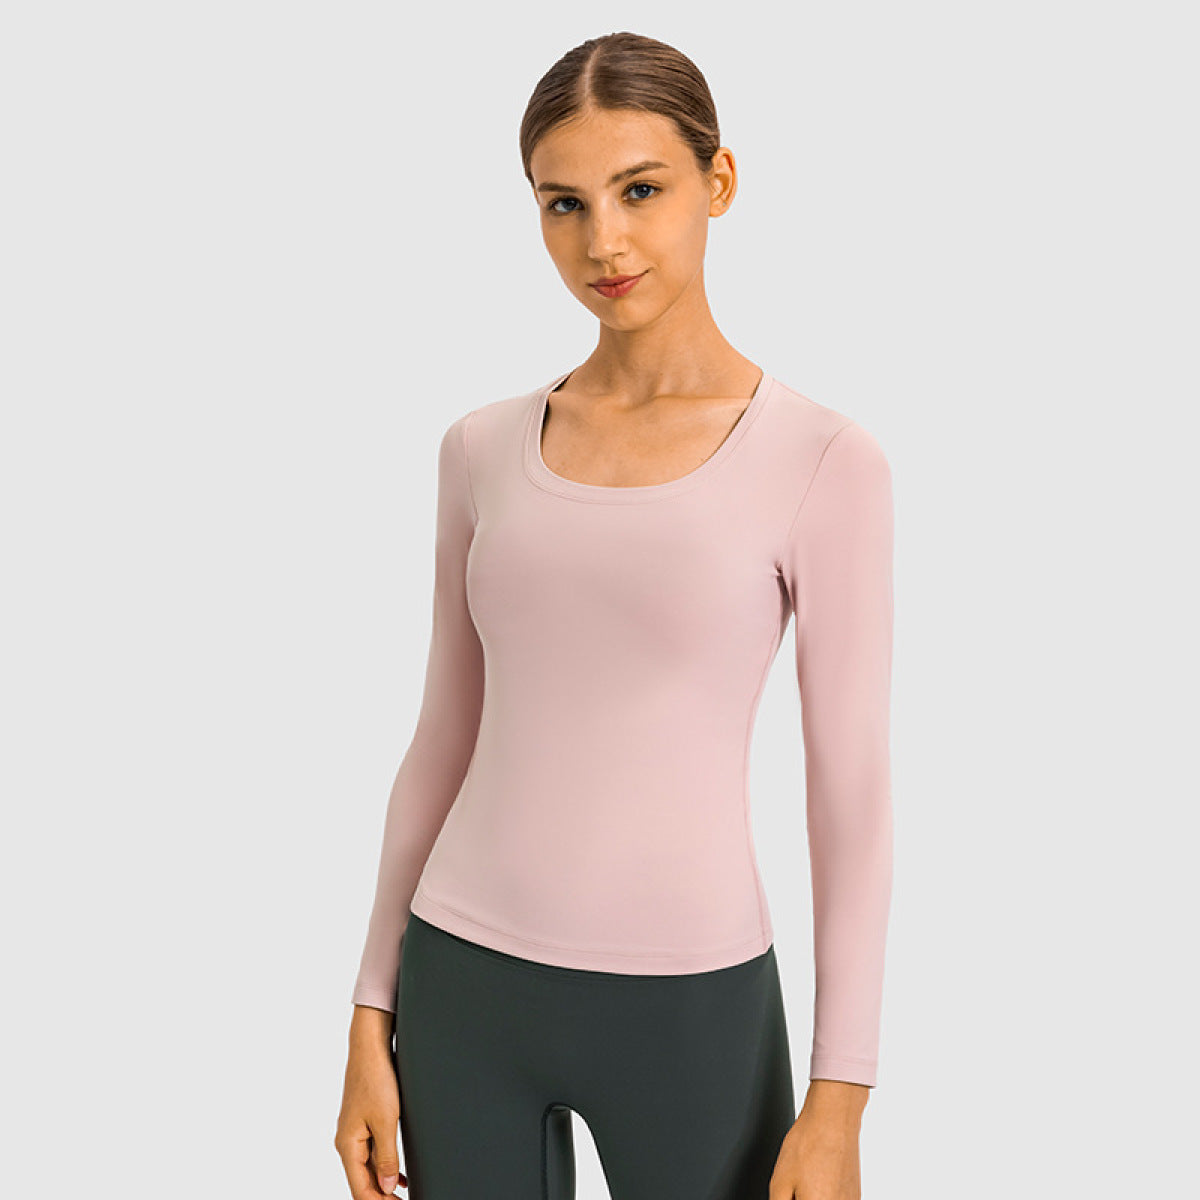 Long-Sleeved Round Neck Active Tops